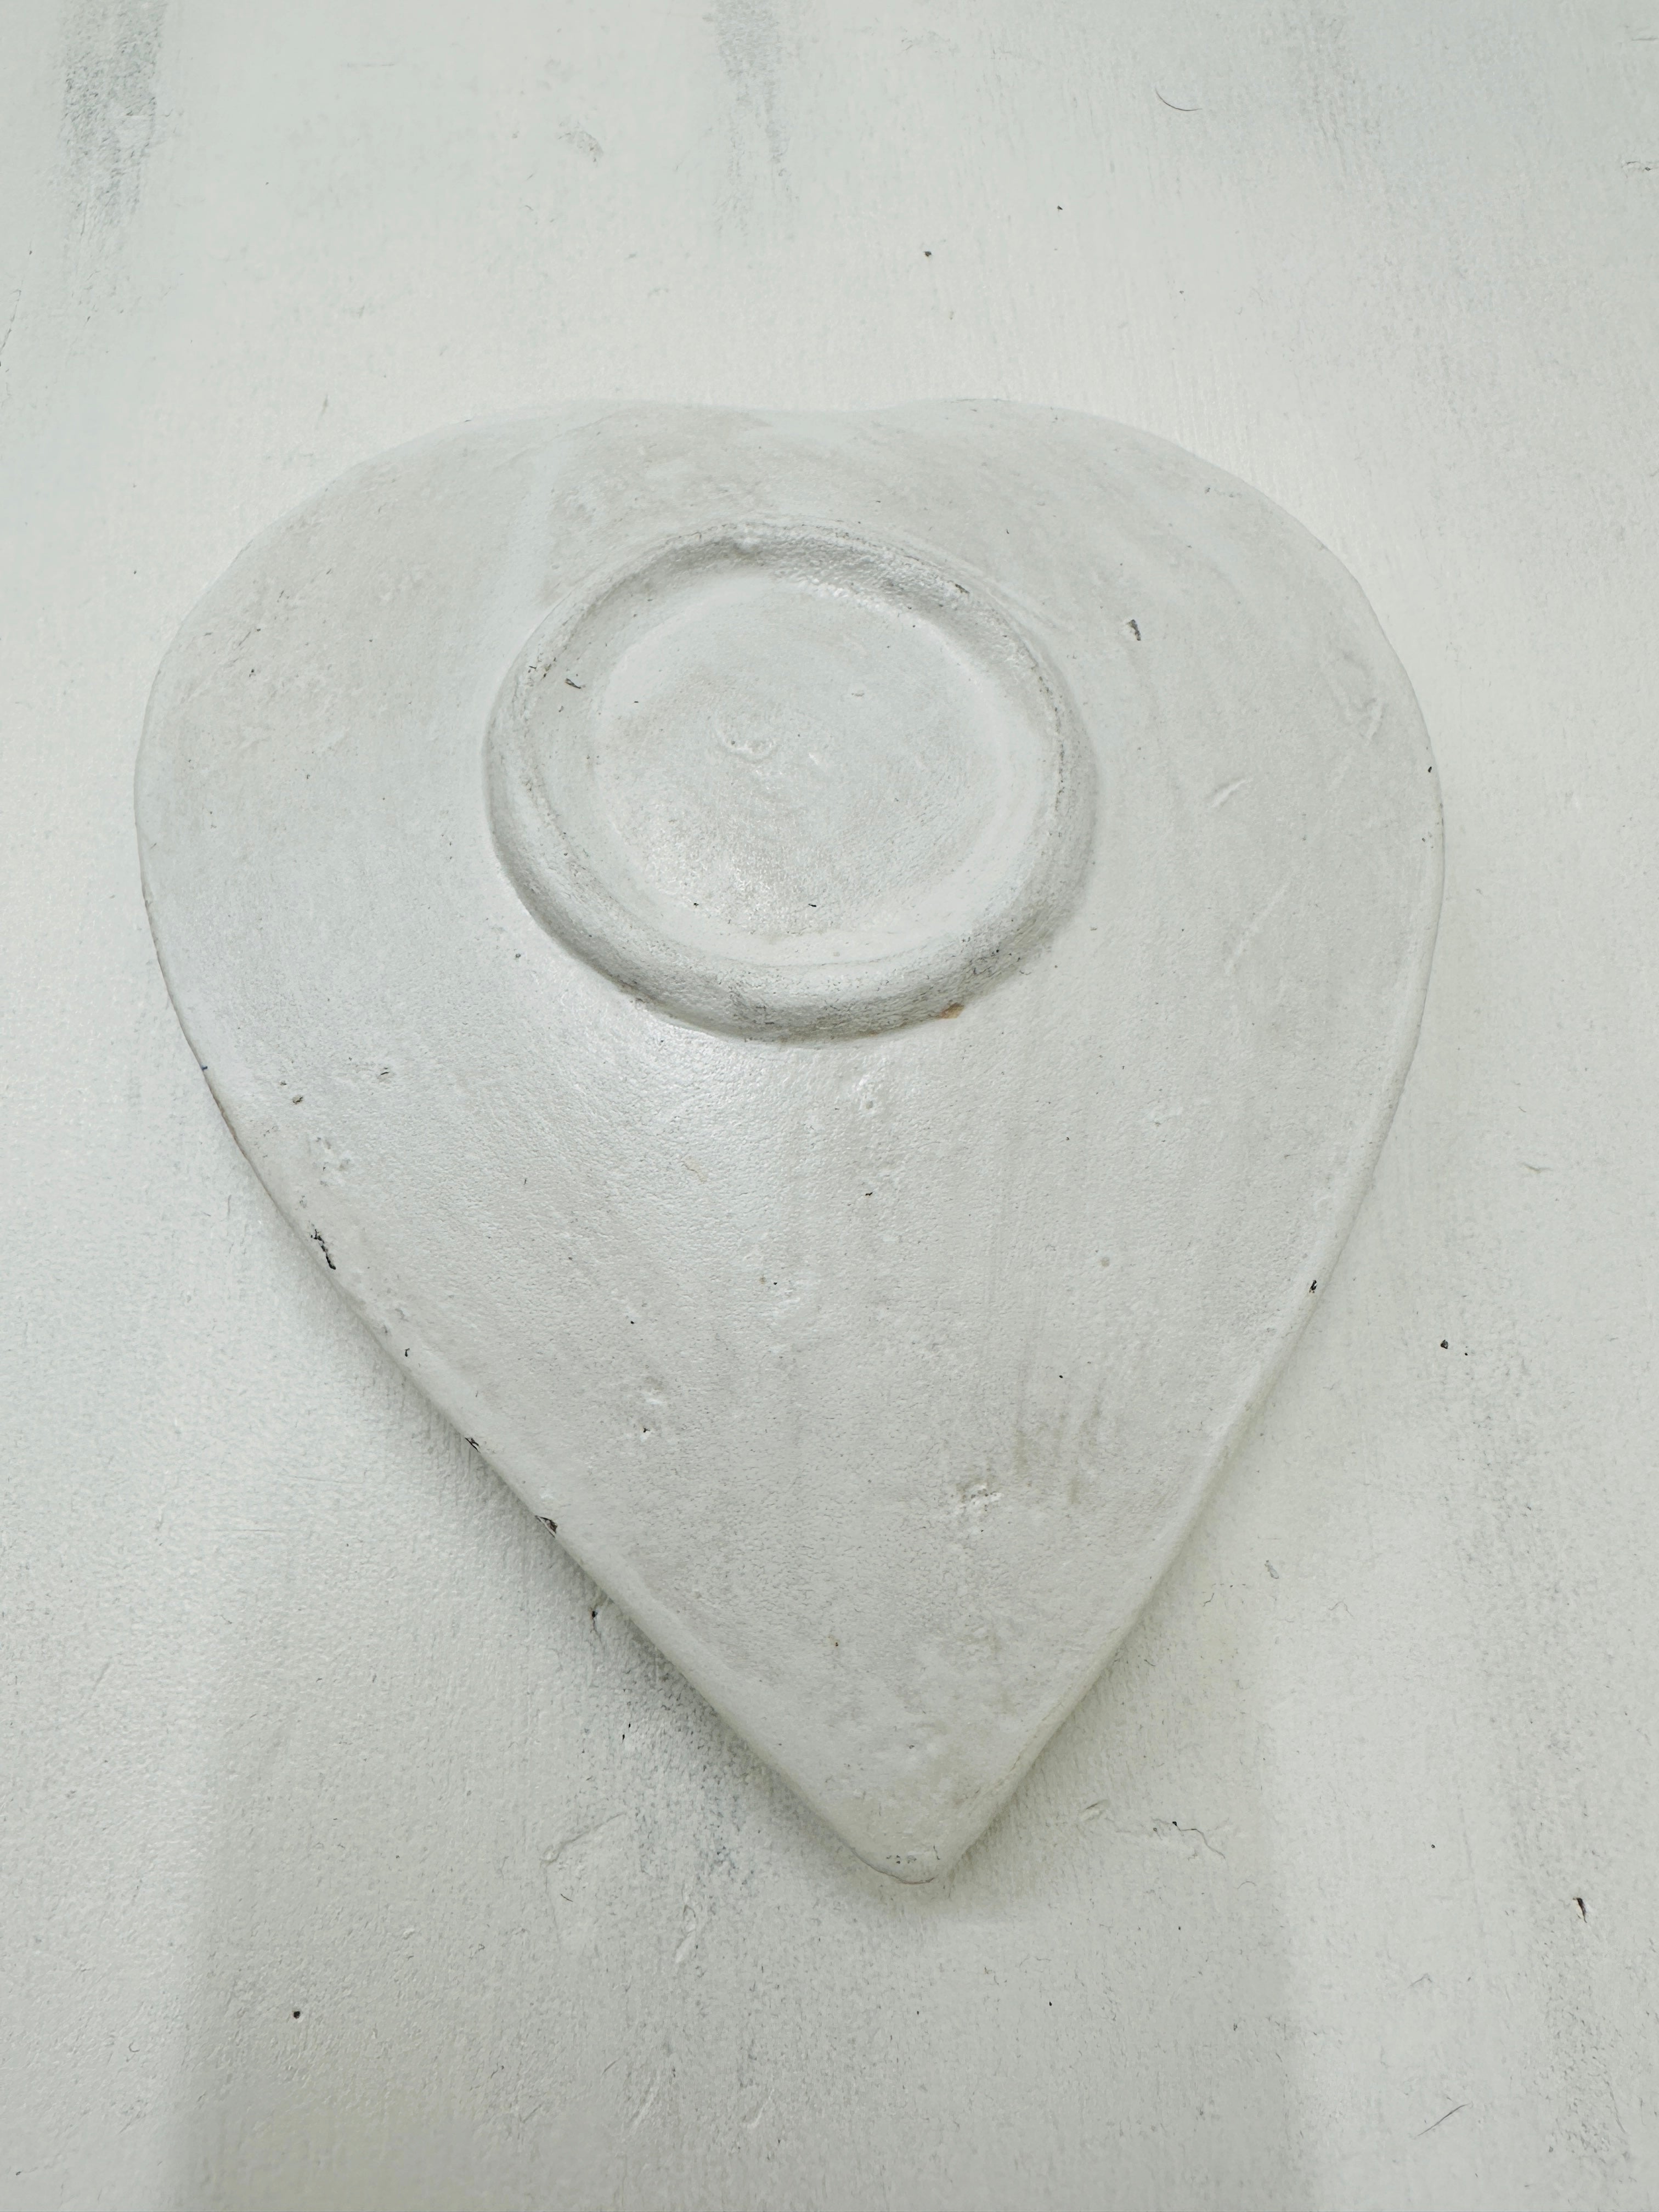 aerial view of base of mosaic heart bowl in white